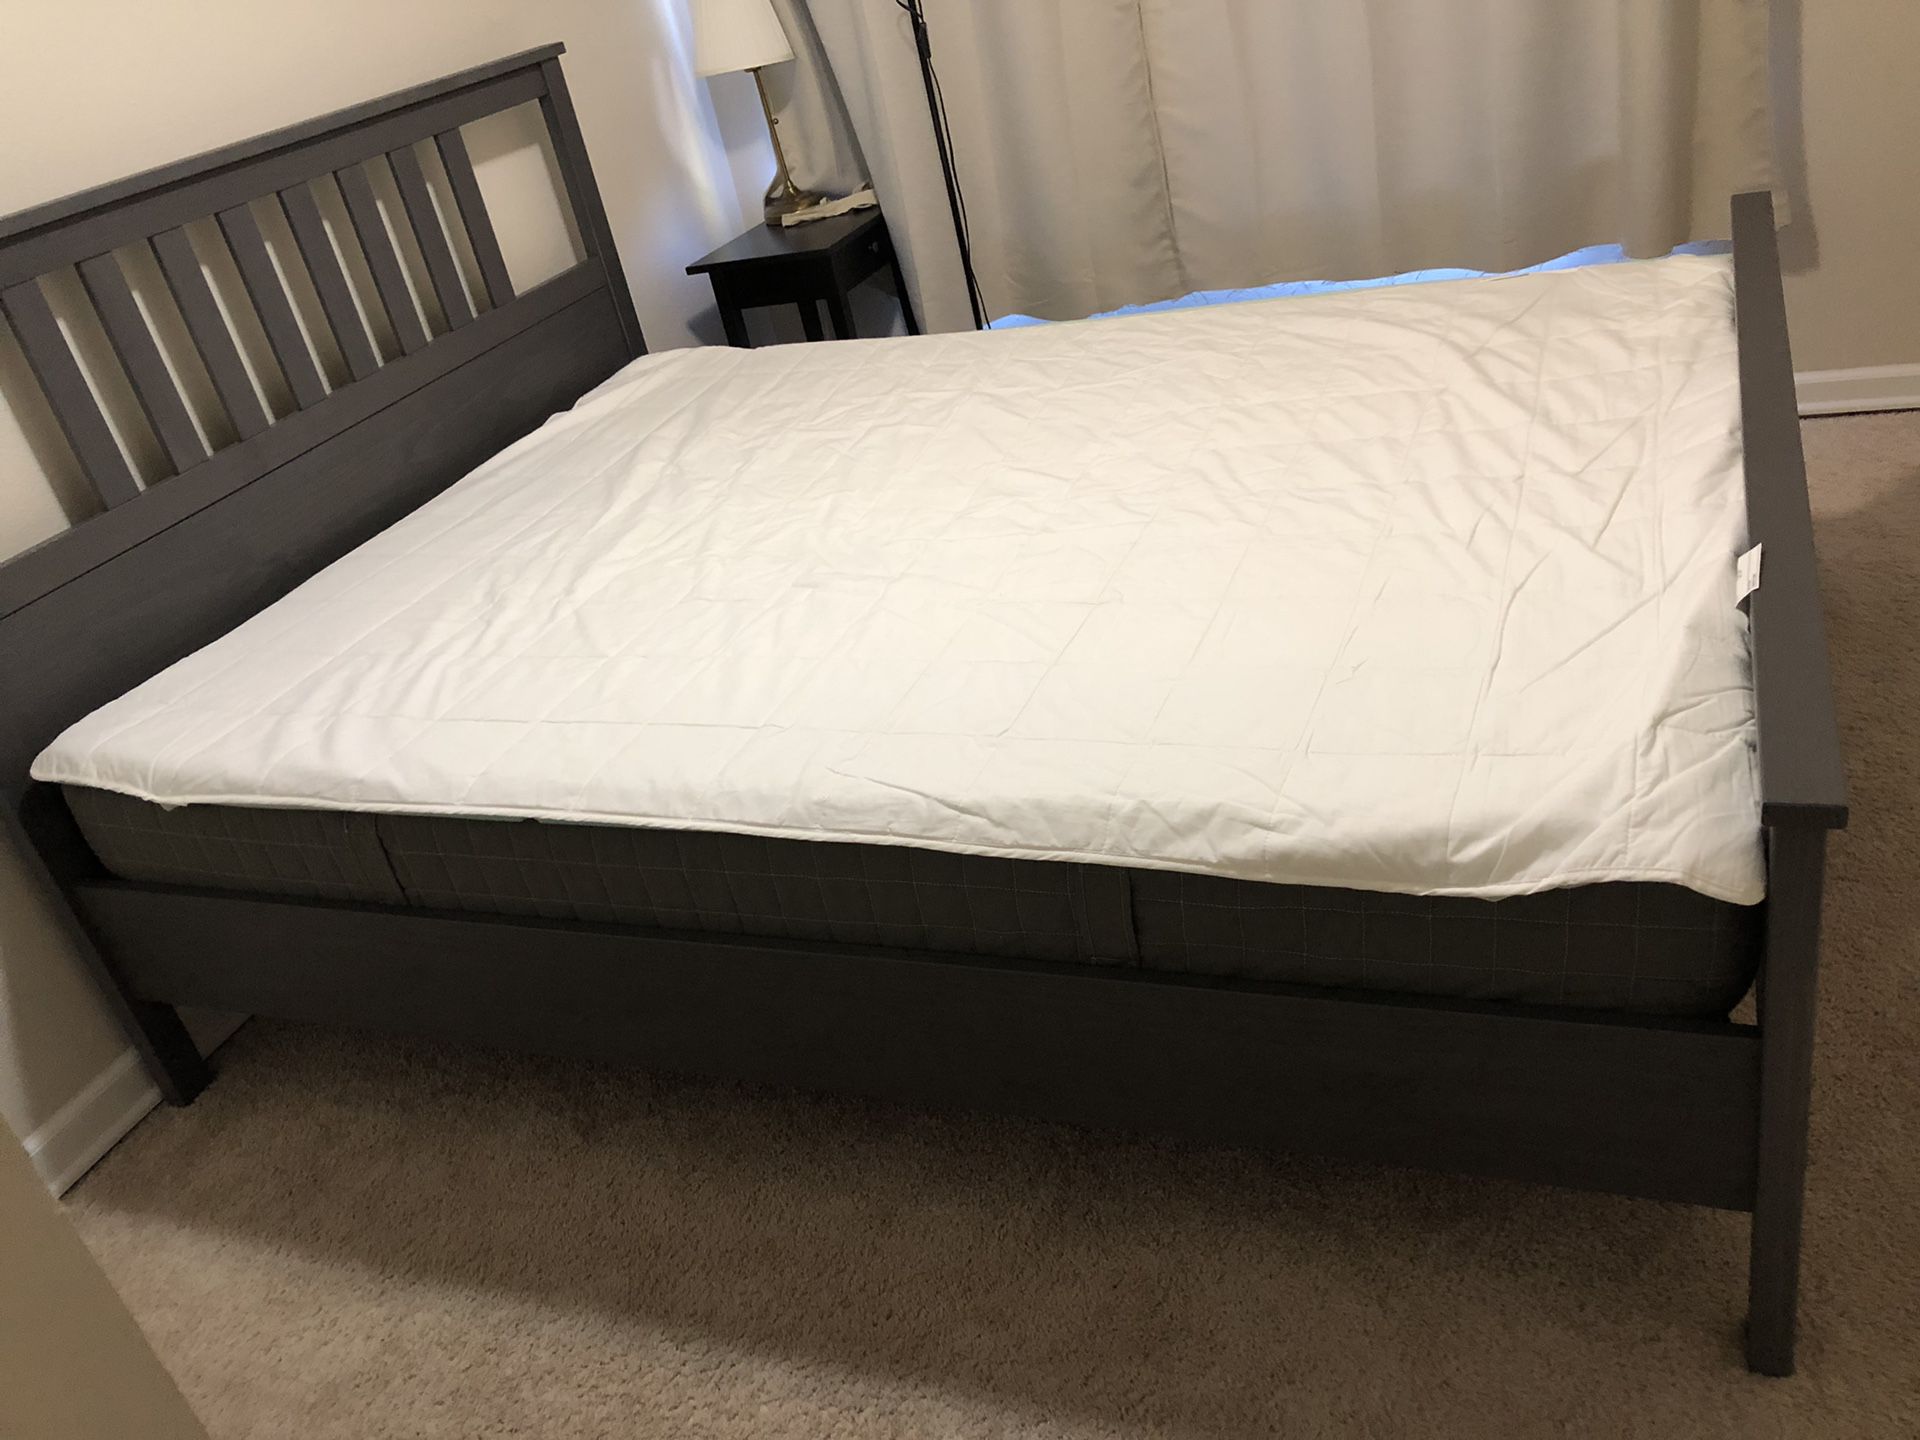 IKEA almost new queen size set